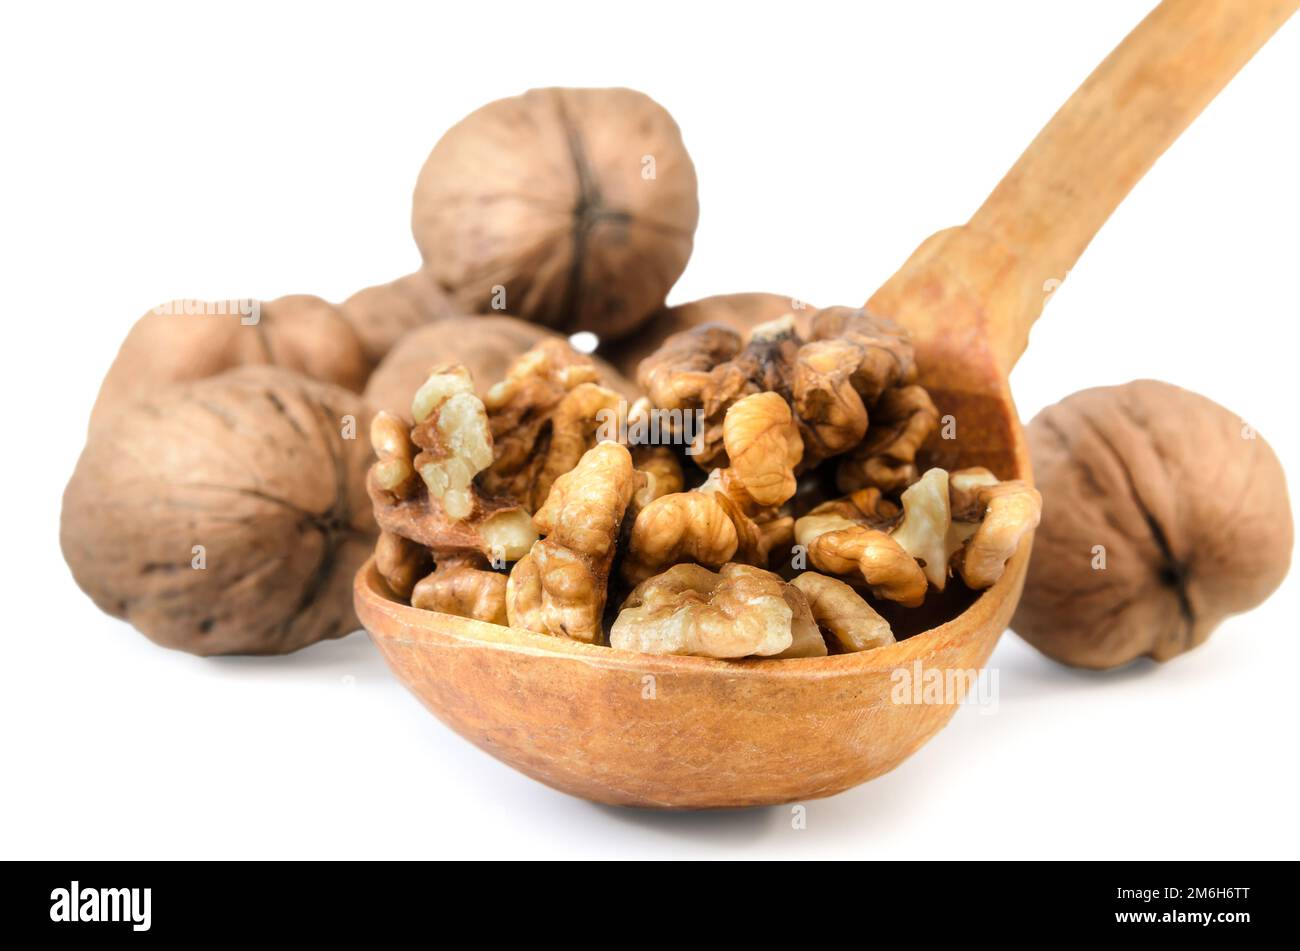 Walnuts on white background with soft shadow Stock Photo